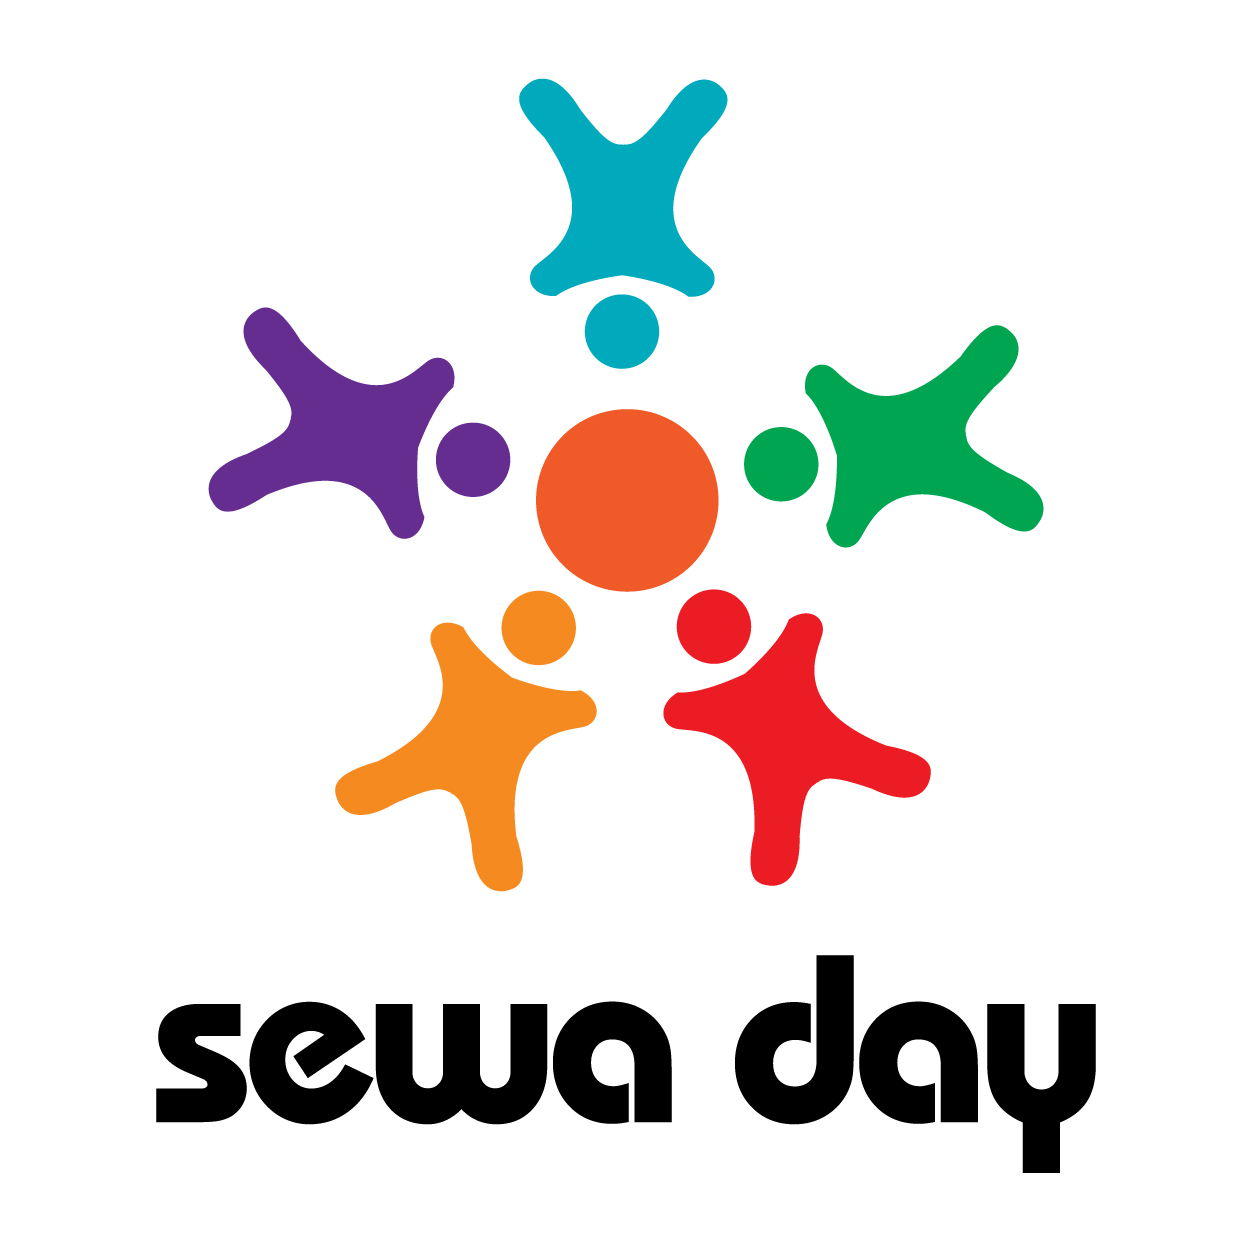 Sewa Day takes place on Sunday 5th October 2014